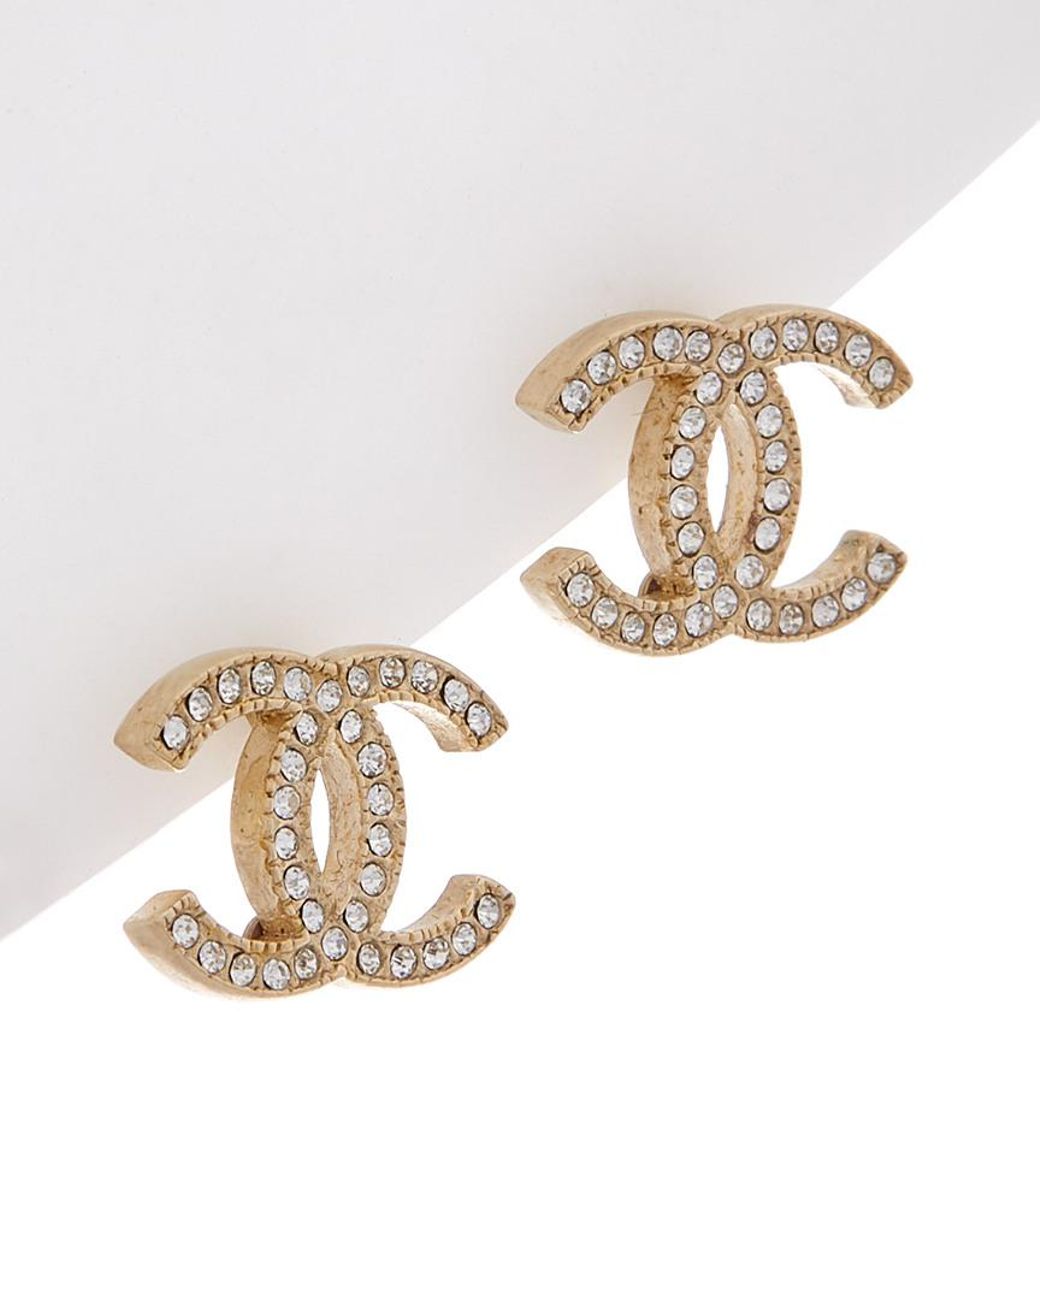 Earrings  Metal  strass gold  crystal  Fashion  CHANEL